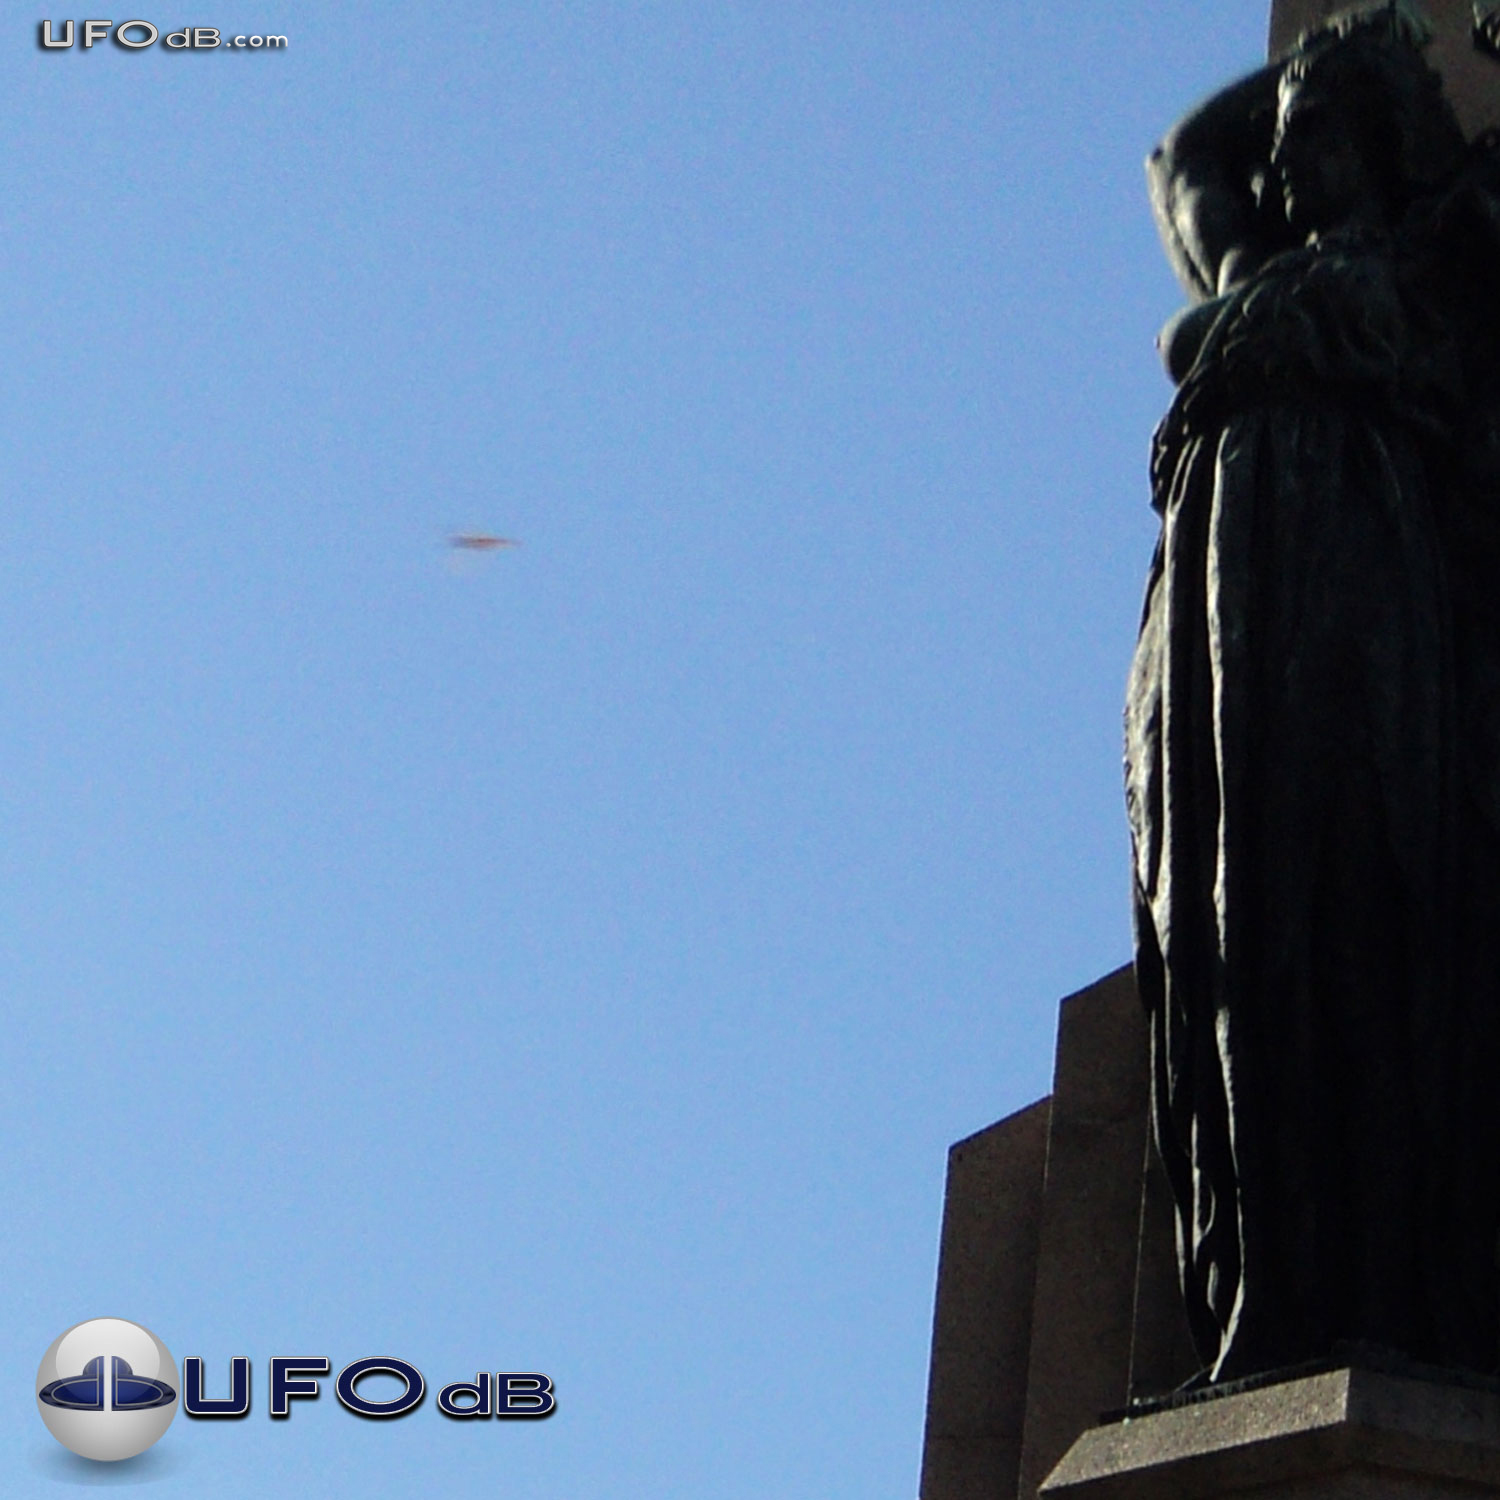 Photo Contest shot capture a passing UFO in Uruguay | May 18 2011 UFO Picture #329-1